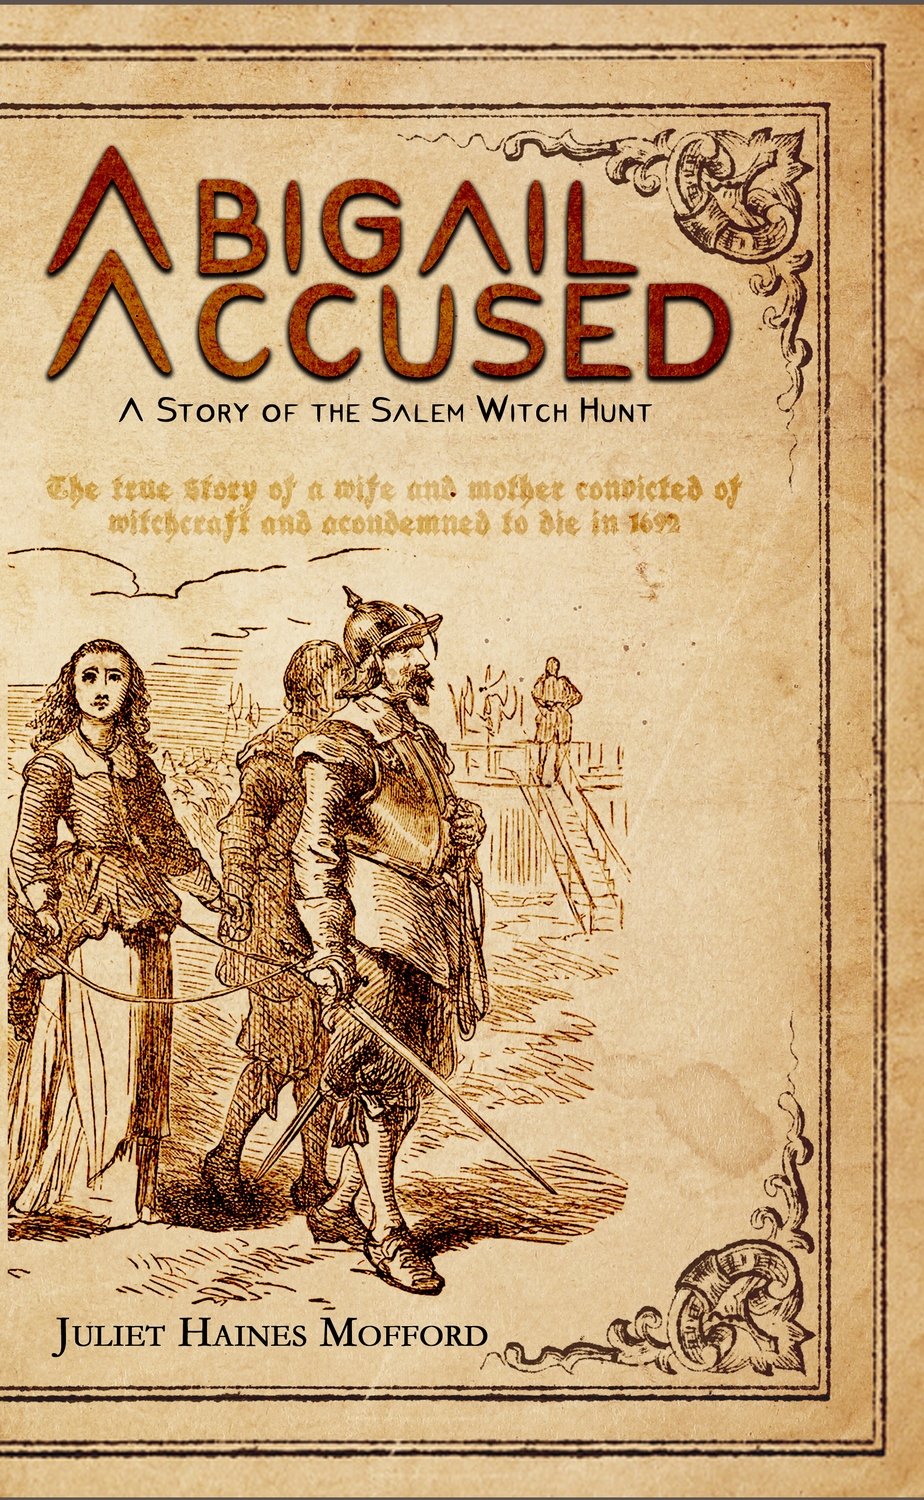 Abigail Accused: A Story of the Salem Witch Hunt